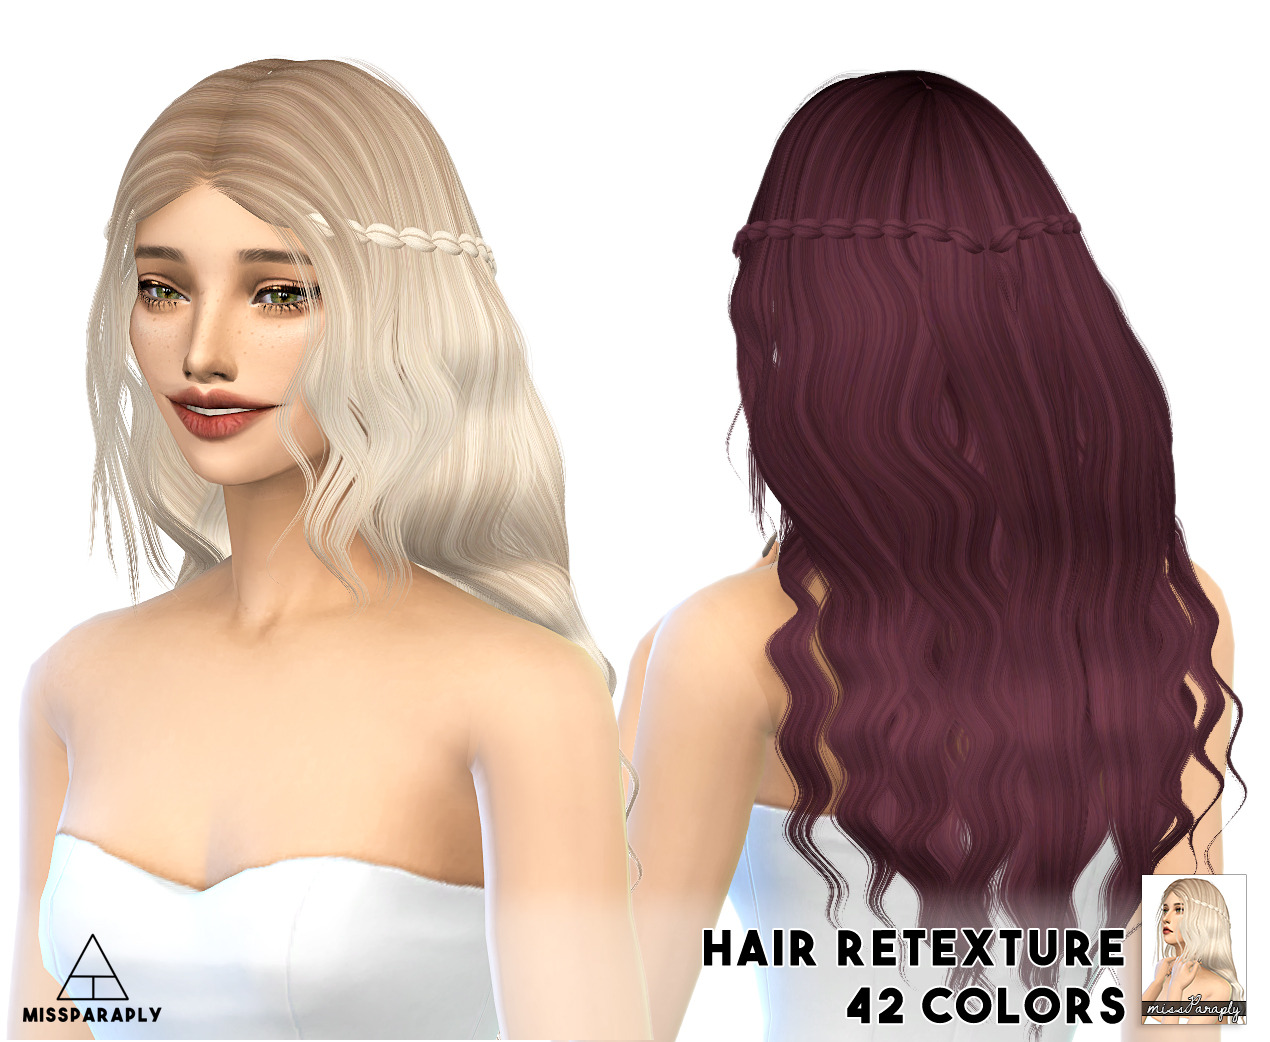 Sims 4 Custom Content Finds Missparaply Hair Retexture Alesso